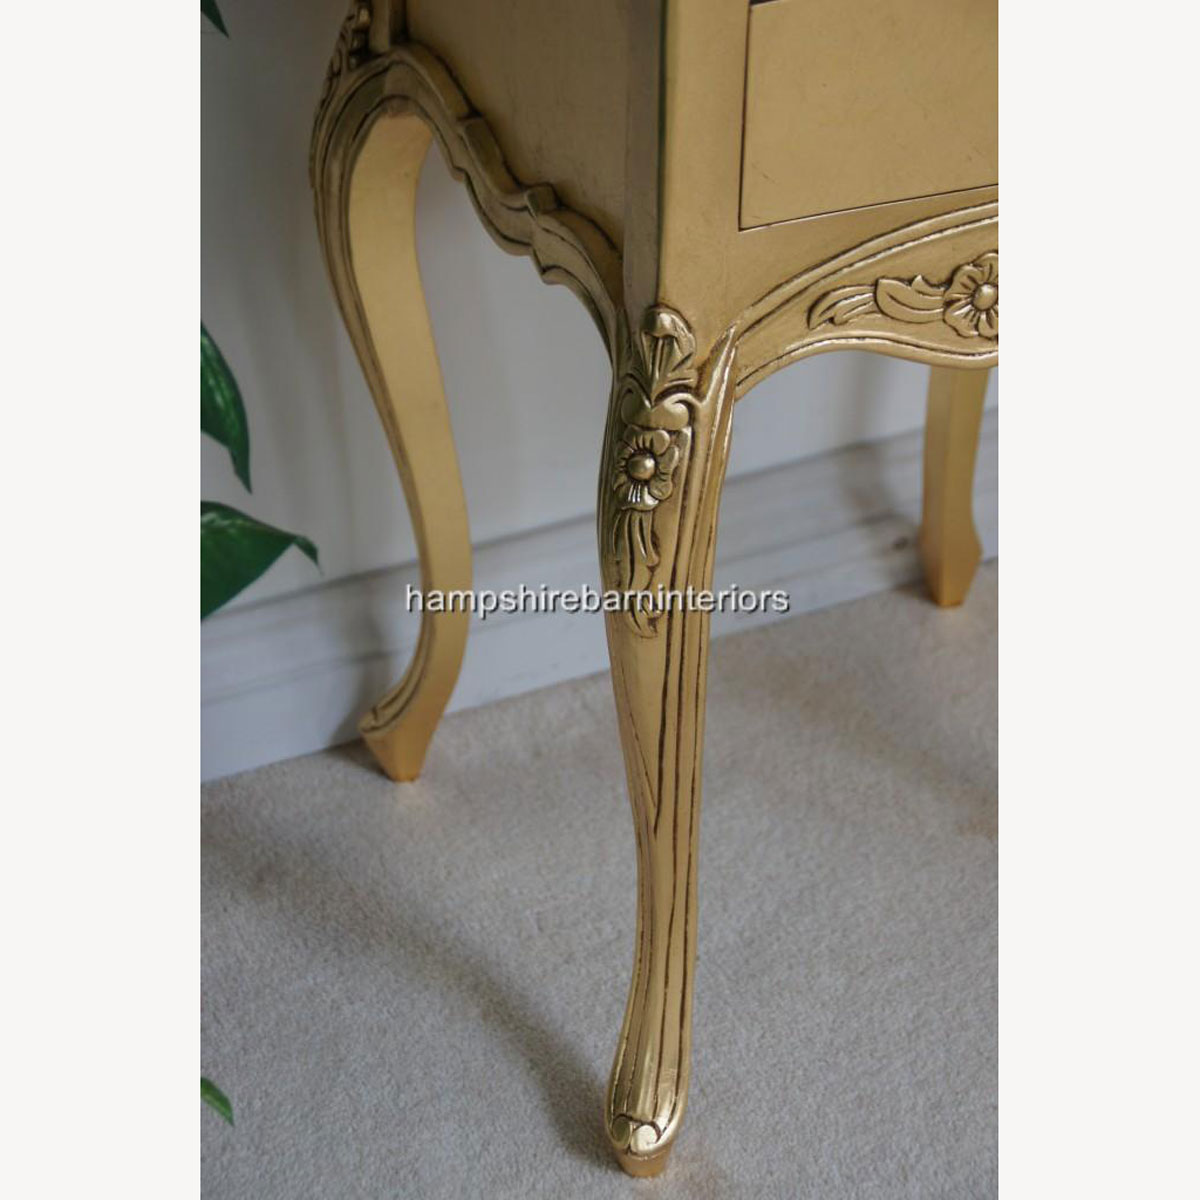 Beautiful Parisian Ornate Two Drawer Lamp Side Table Or Bedside Cabinet Shown In Gold Leaf 2 - Hampshire Barn Interiors - Beautiful Parisian Ornate Two Drawer Lamp Side Table Or Bedside Cabinet Shown In Gold Leaf -